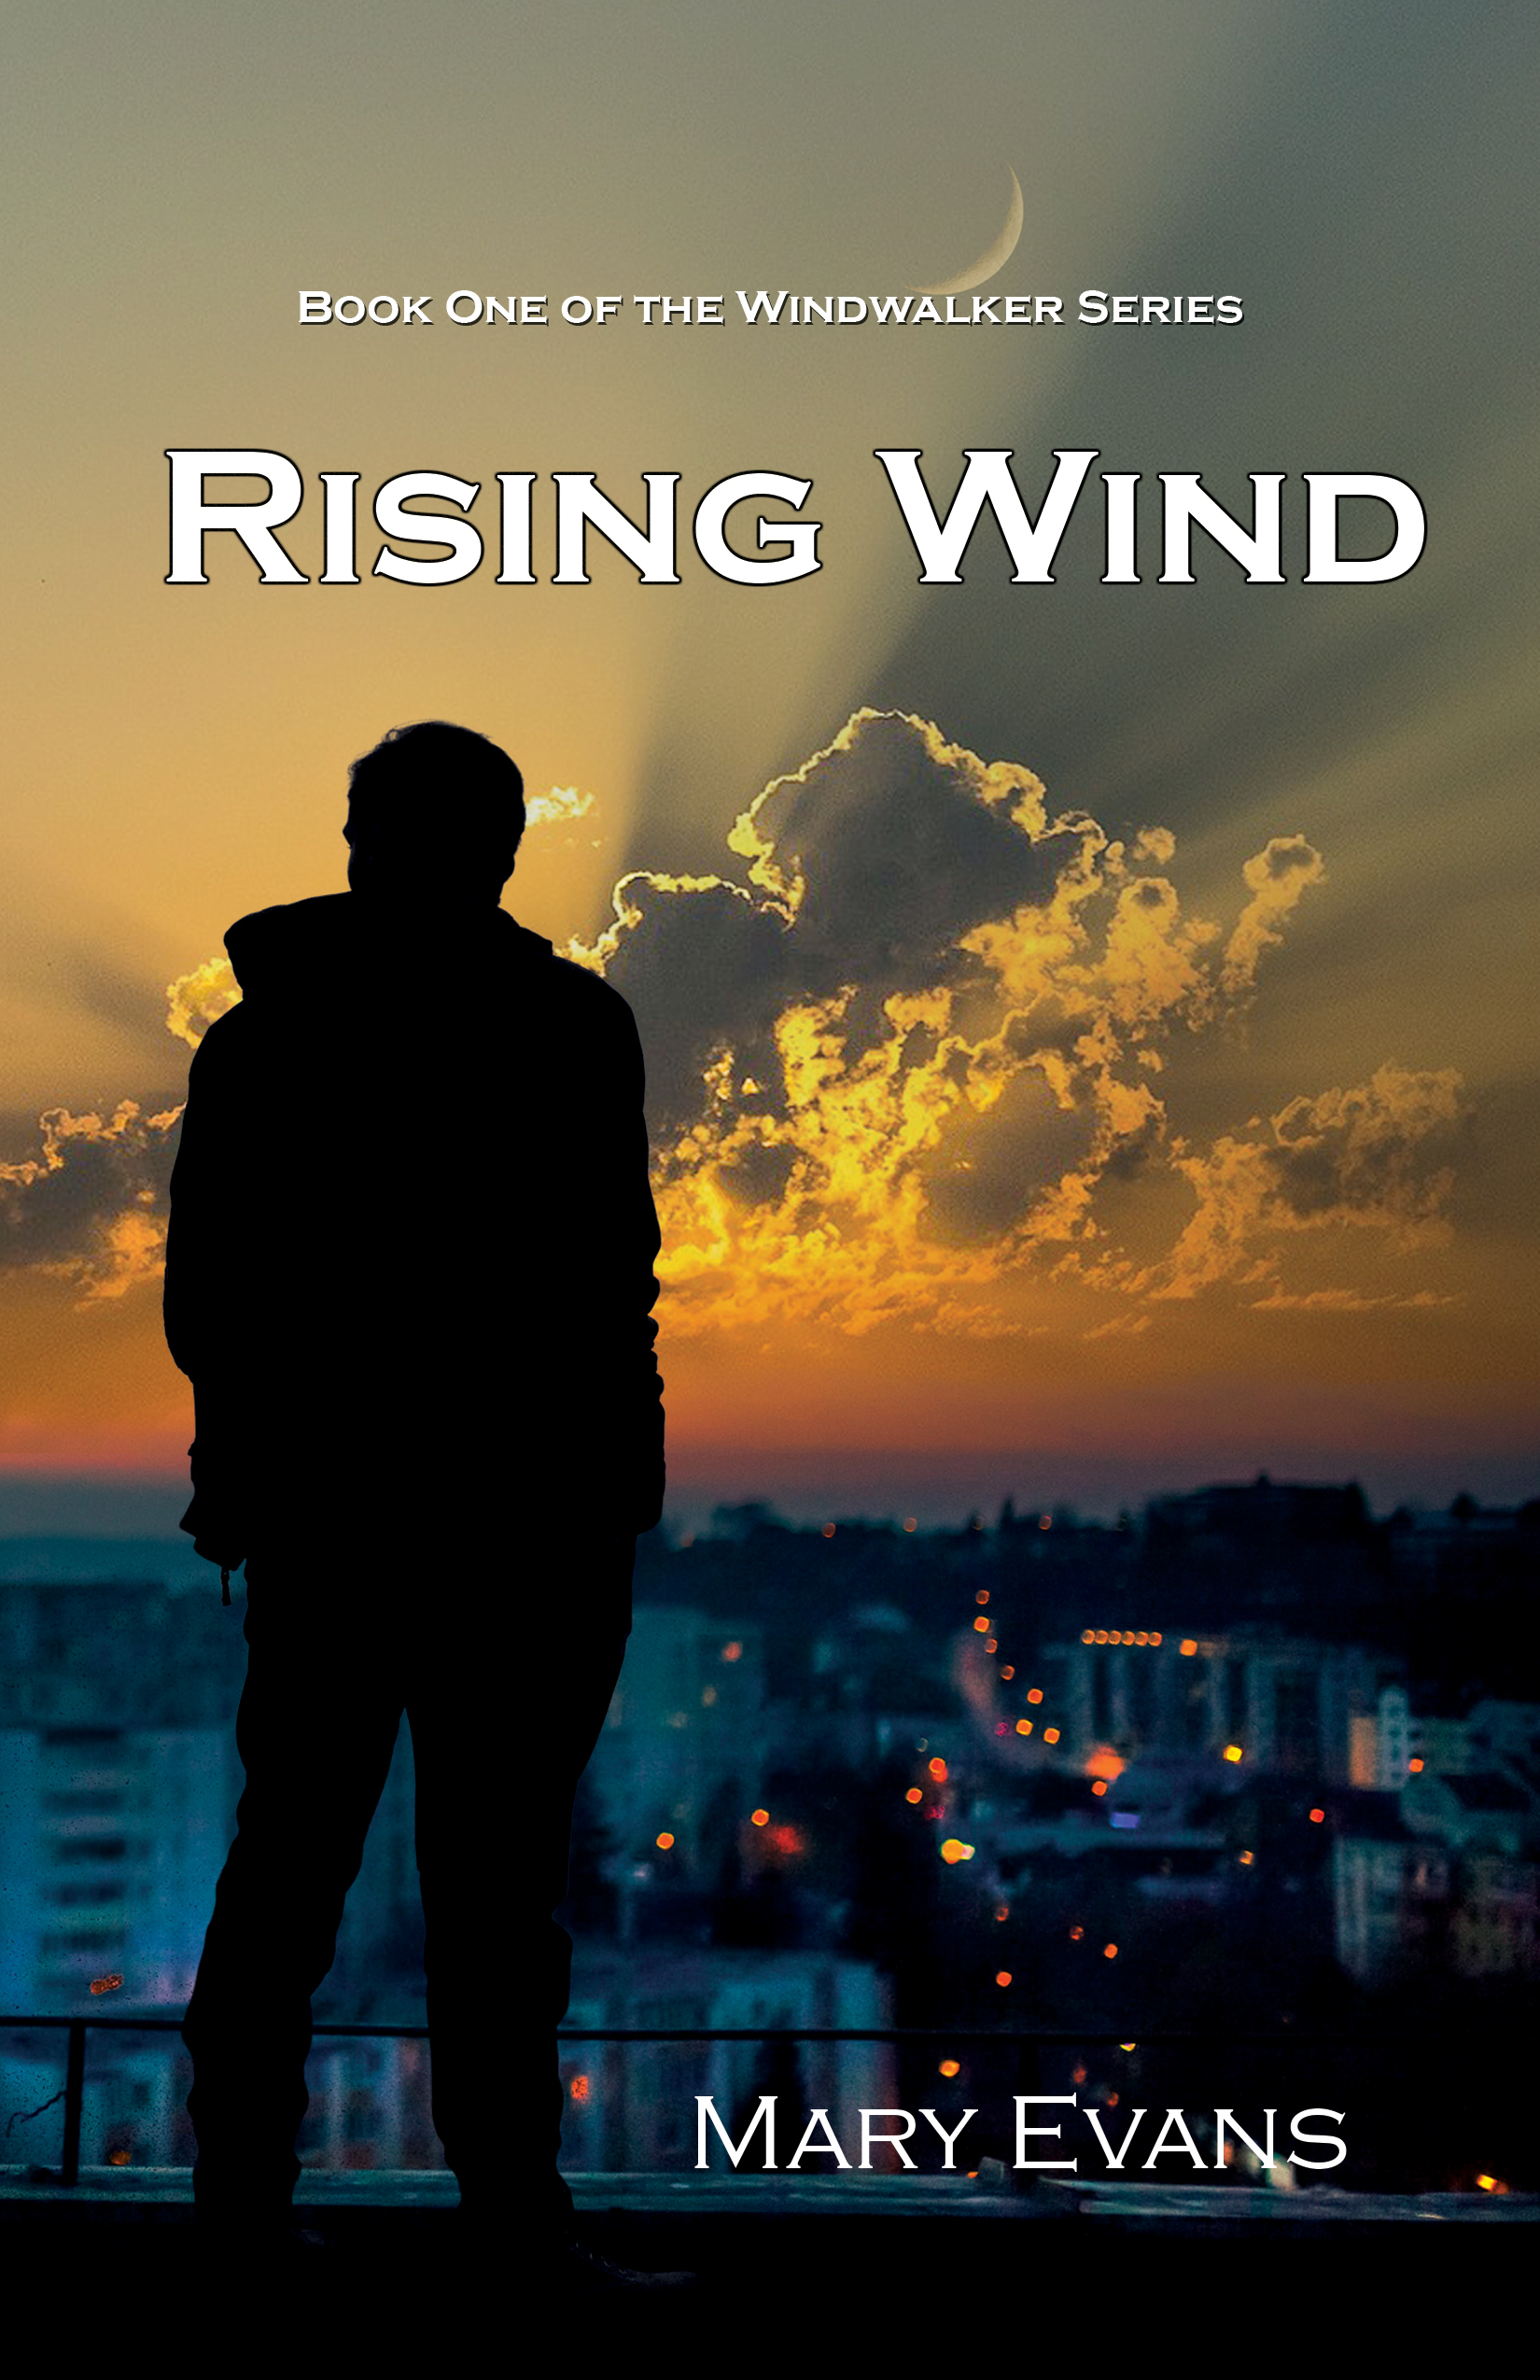 FREE: Rising Wind by Mary Evans